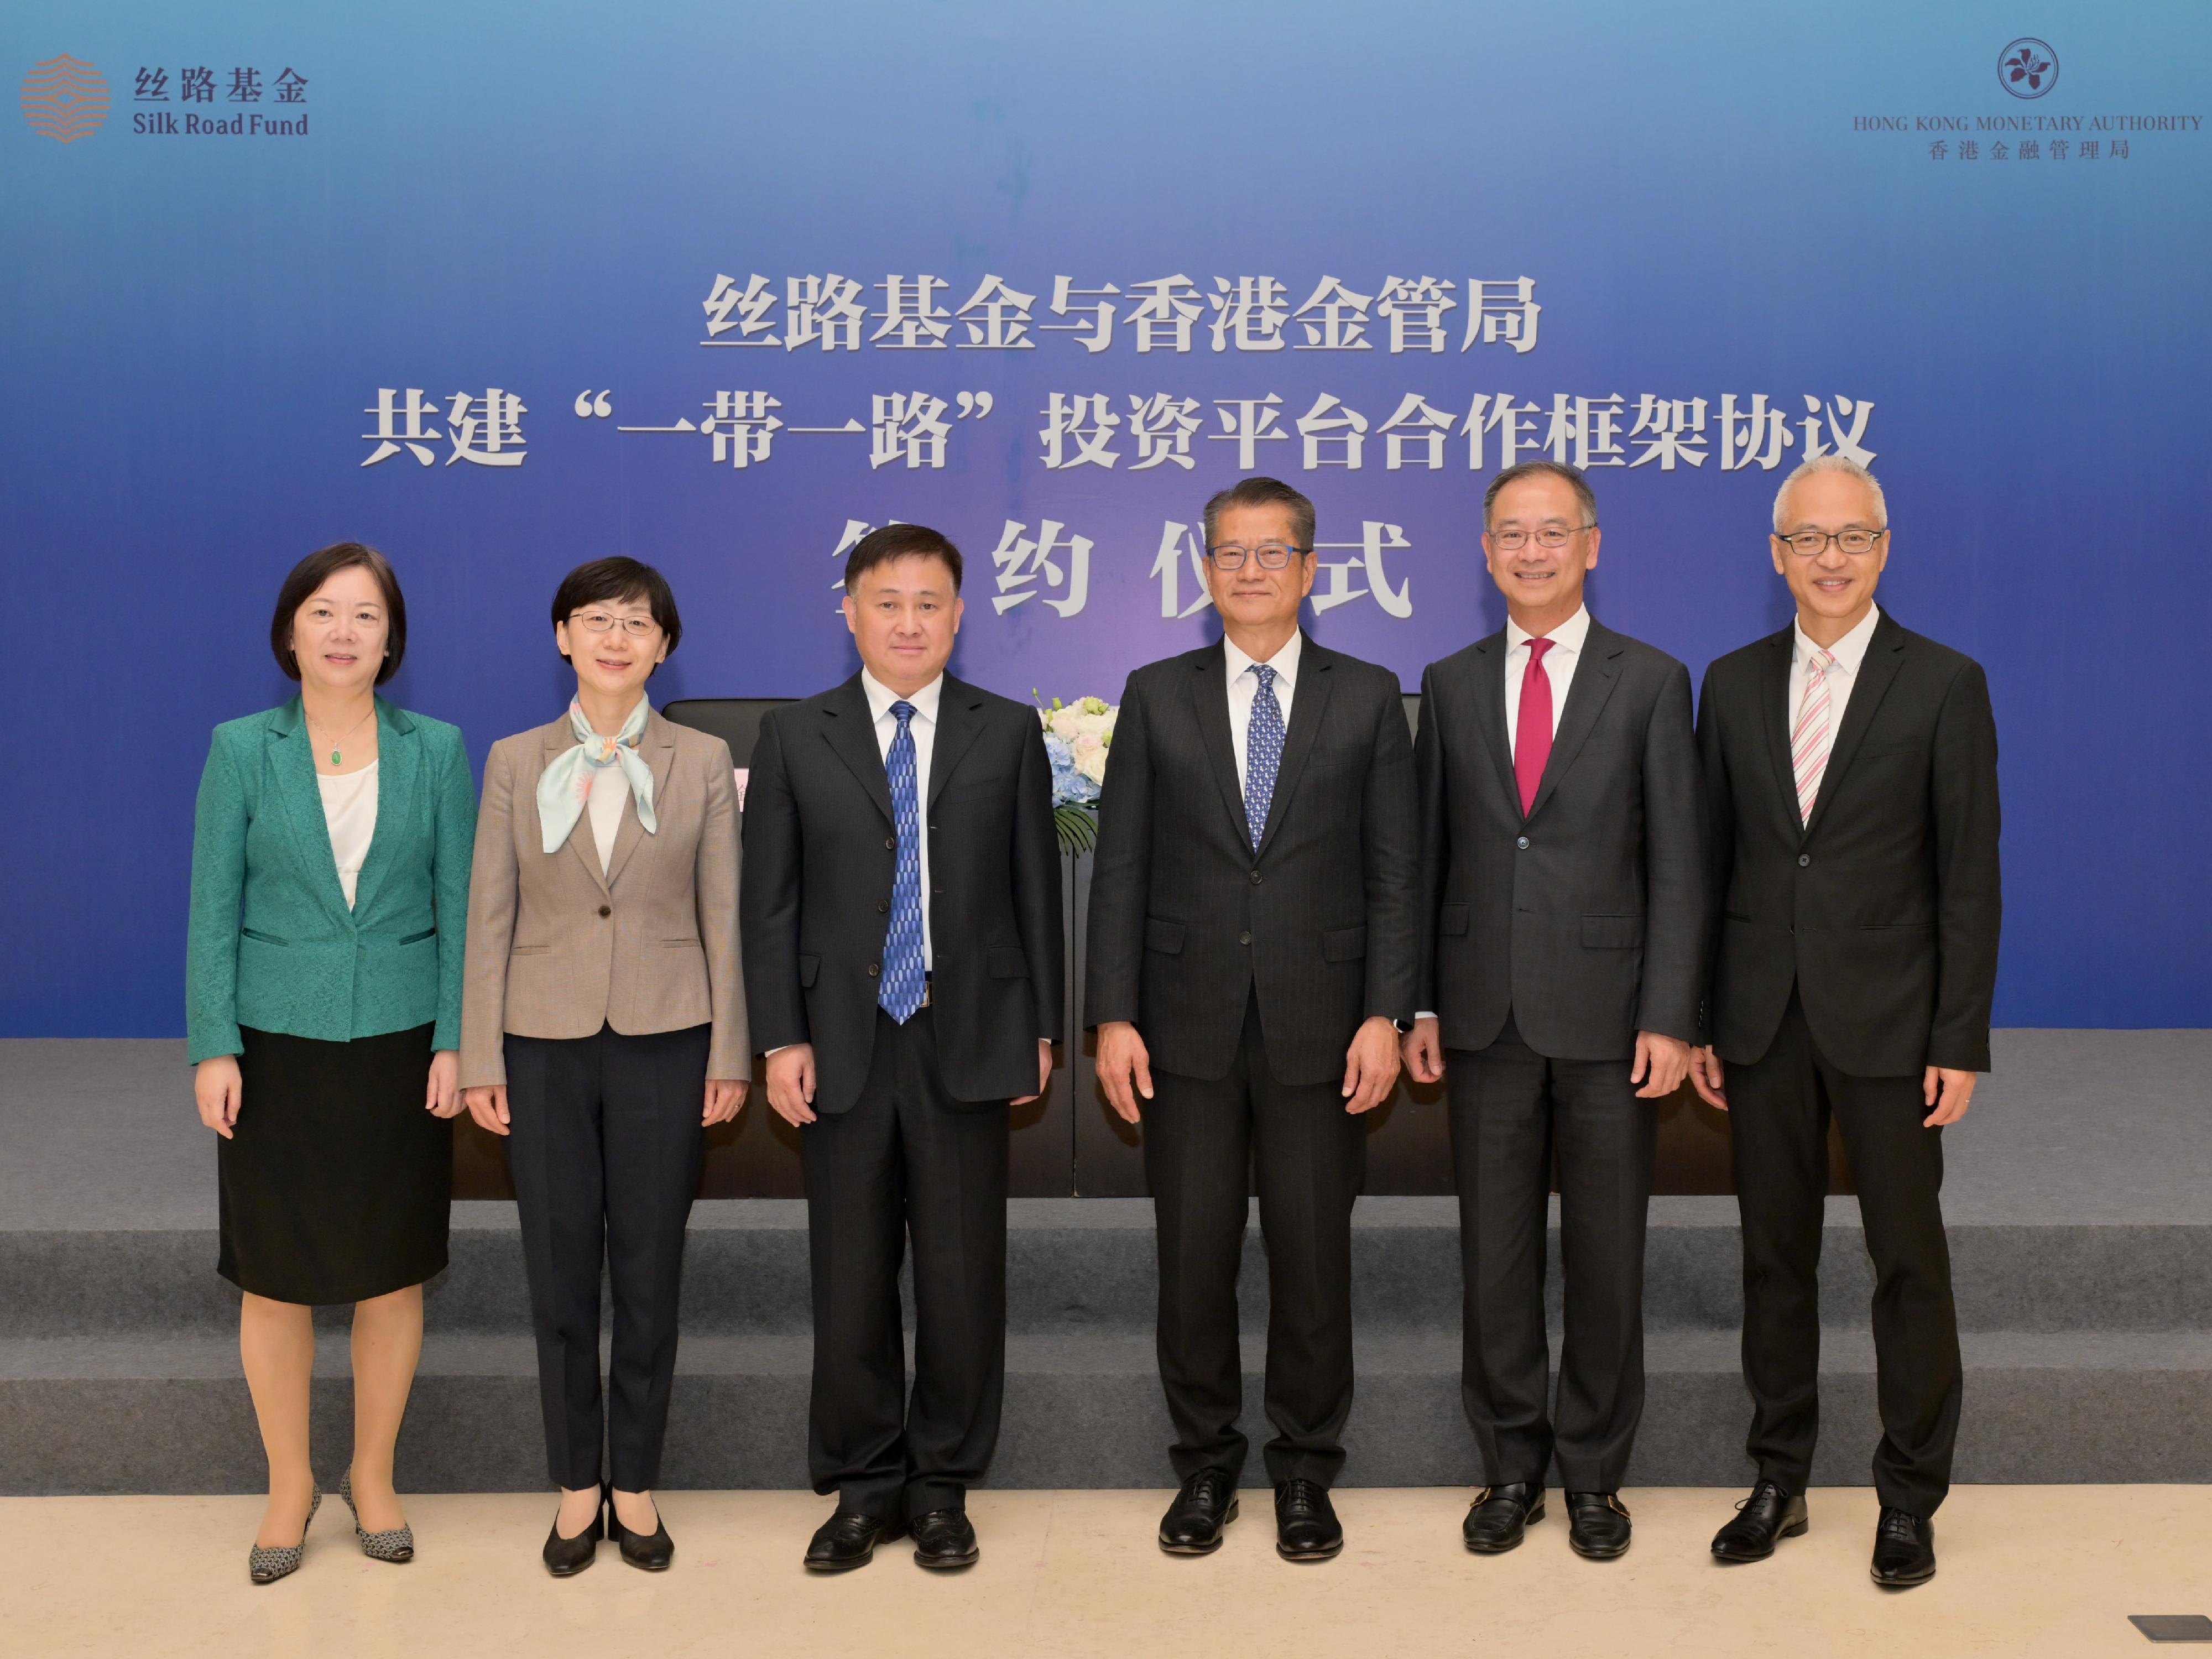 The Financial Secretary, Mr Paul Chan, attended and witnessed the signing of a Cooperation Framework Agreement between the Hong Kong Monetary Authority (HKMA) and the Silk Road Fund Co., Ltd in forming a Belt and Road investment platform in Beijing this morning (October 19).  Photo shows Mr Chan (third right) and the Governor of the People’s Bank of China, Mr Pan Gongsheng (third left) in a group photo after the signing of the agreement.  The Chief Executive of the HKMA, Mr Eddie Yue (second right) also attended. 
